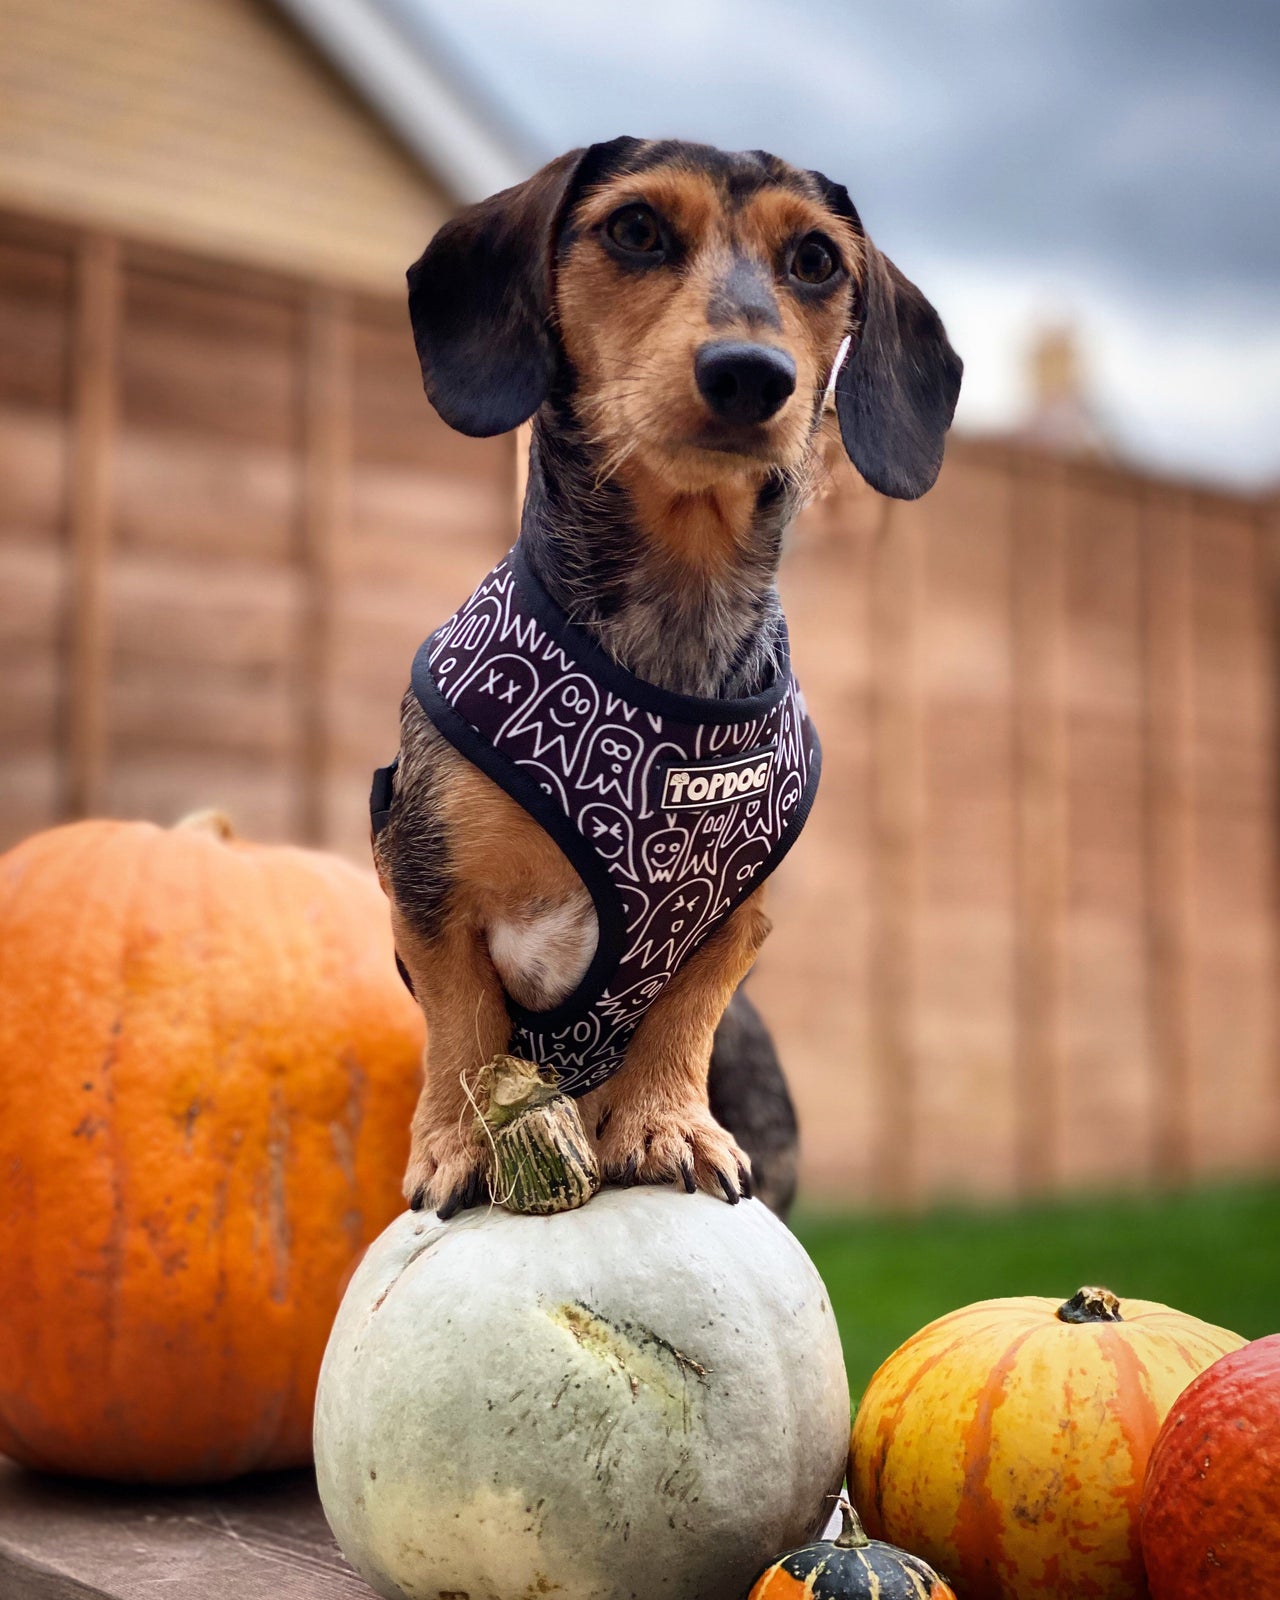 Dachshund wearing TopDog Harnesses Squad Ghouls reversible dog harness, sitting on top of a pumpkin amongst other pumpkins